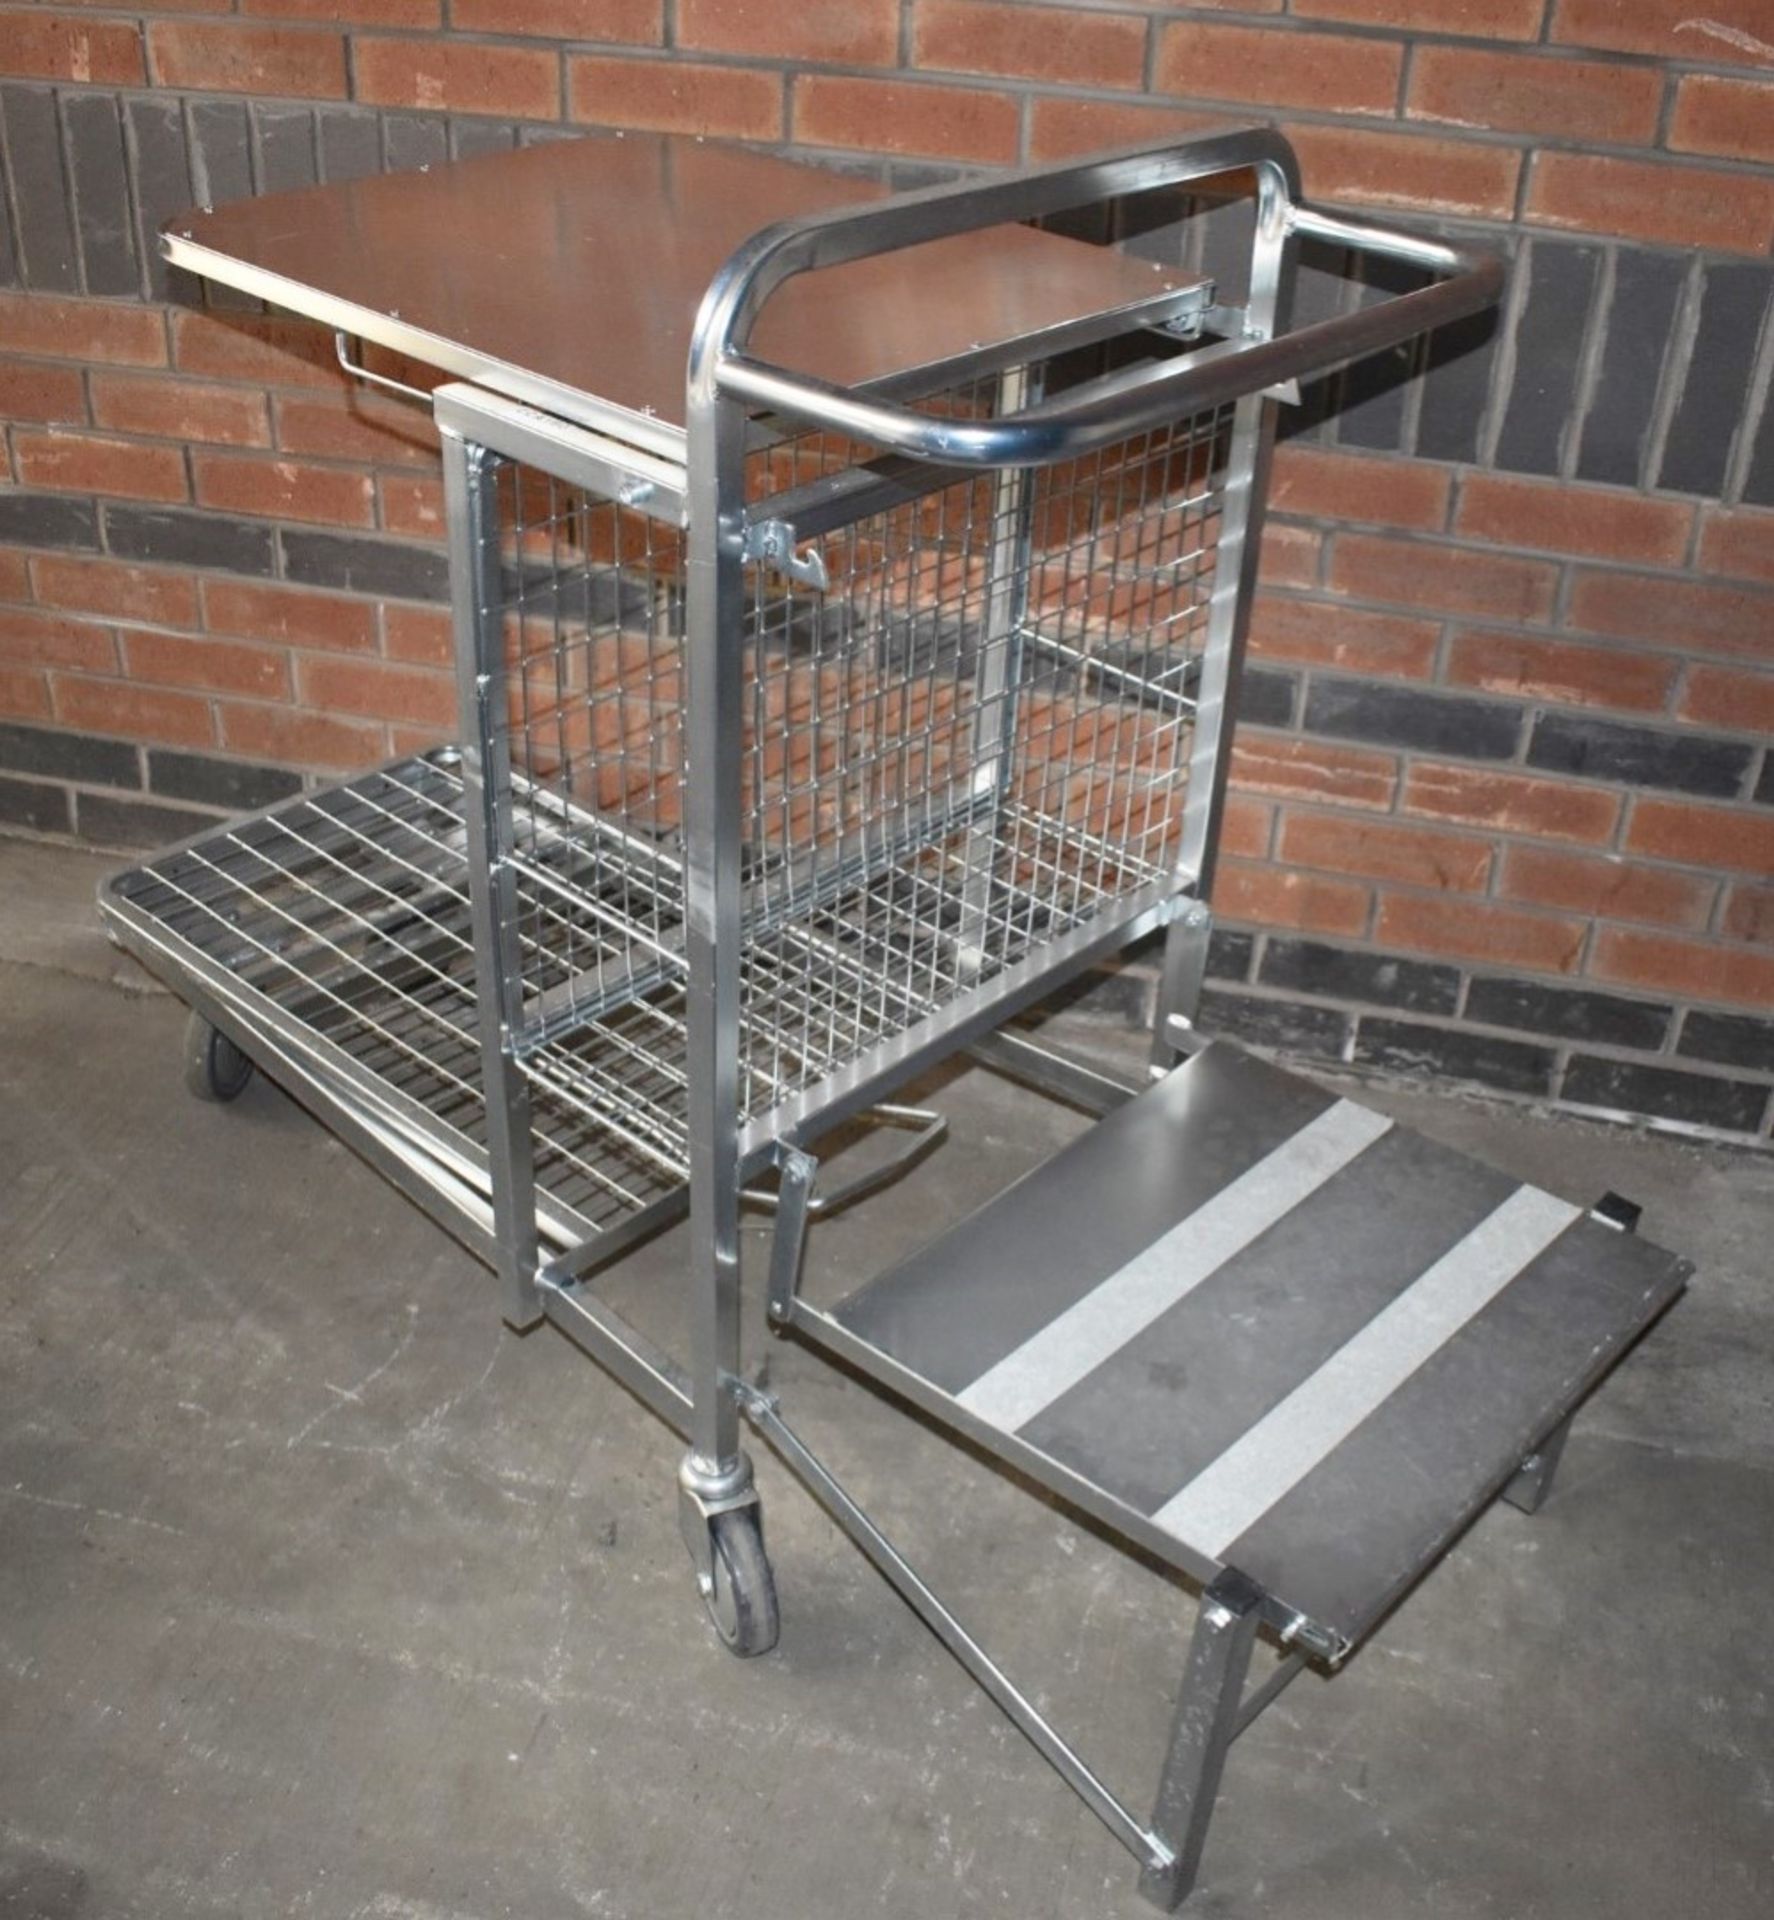 1 x Supermarket Retail Merchandising Trolley With Pull Out Step and Folding Shelf - CL595 - Ref: CCA - Image 4 of 9